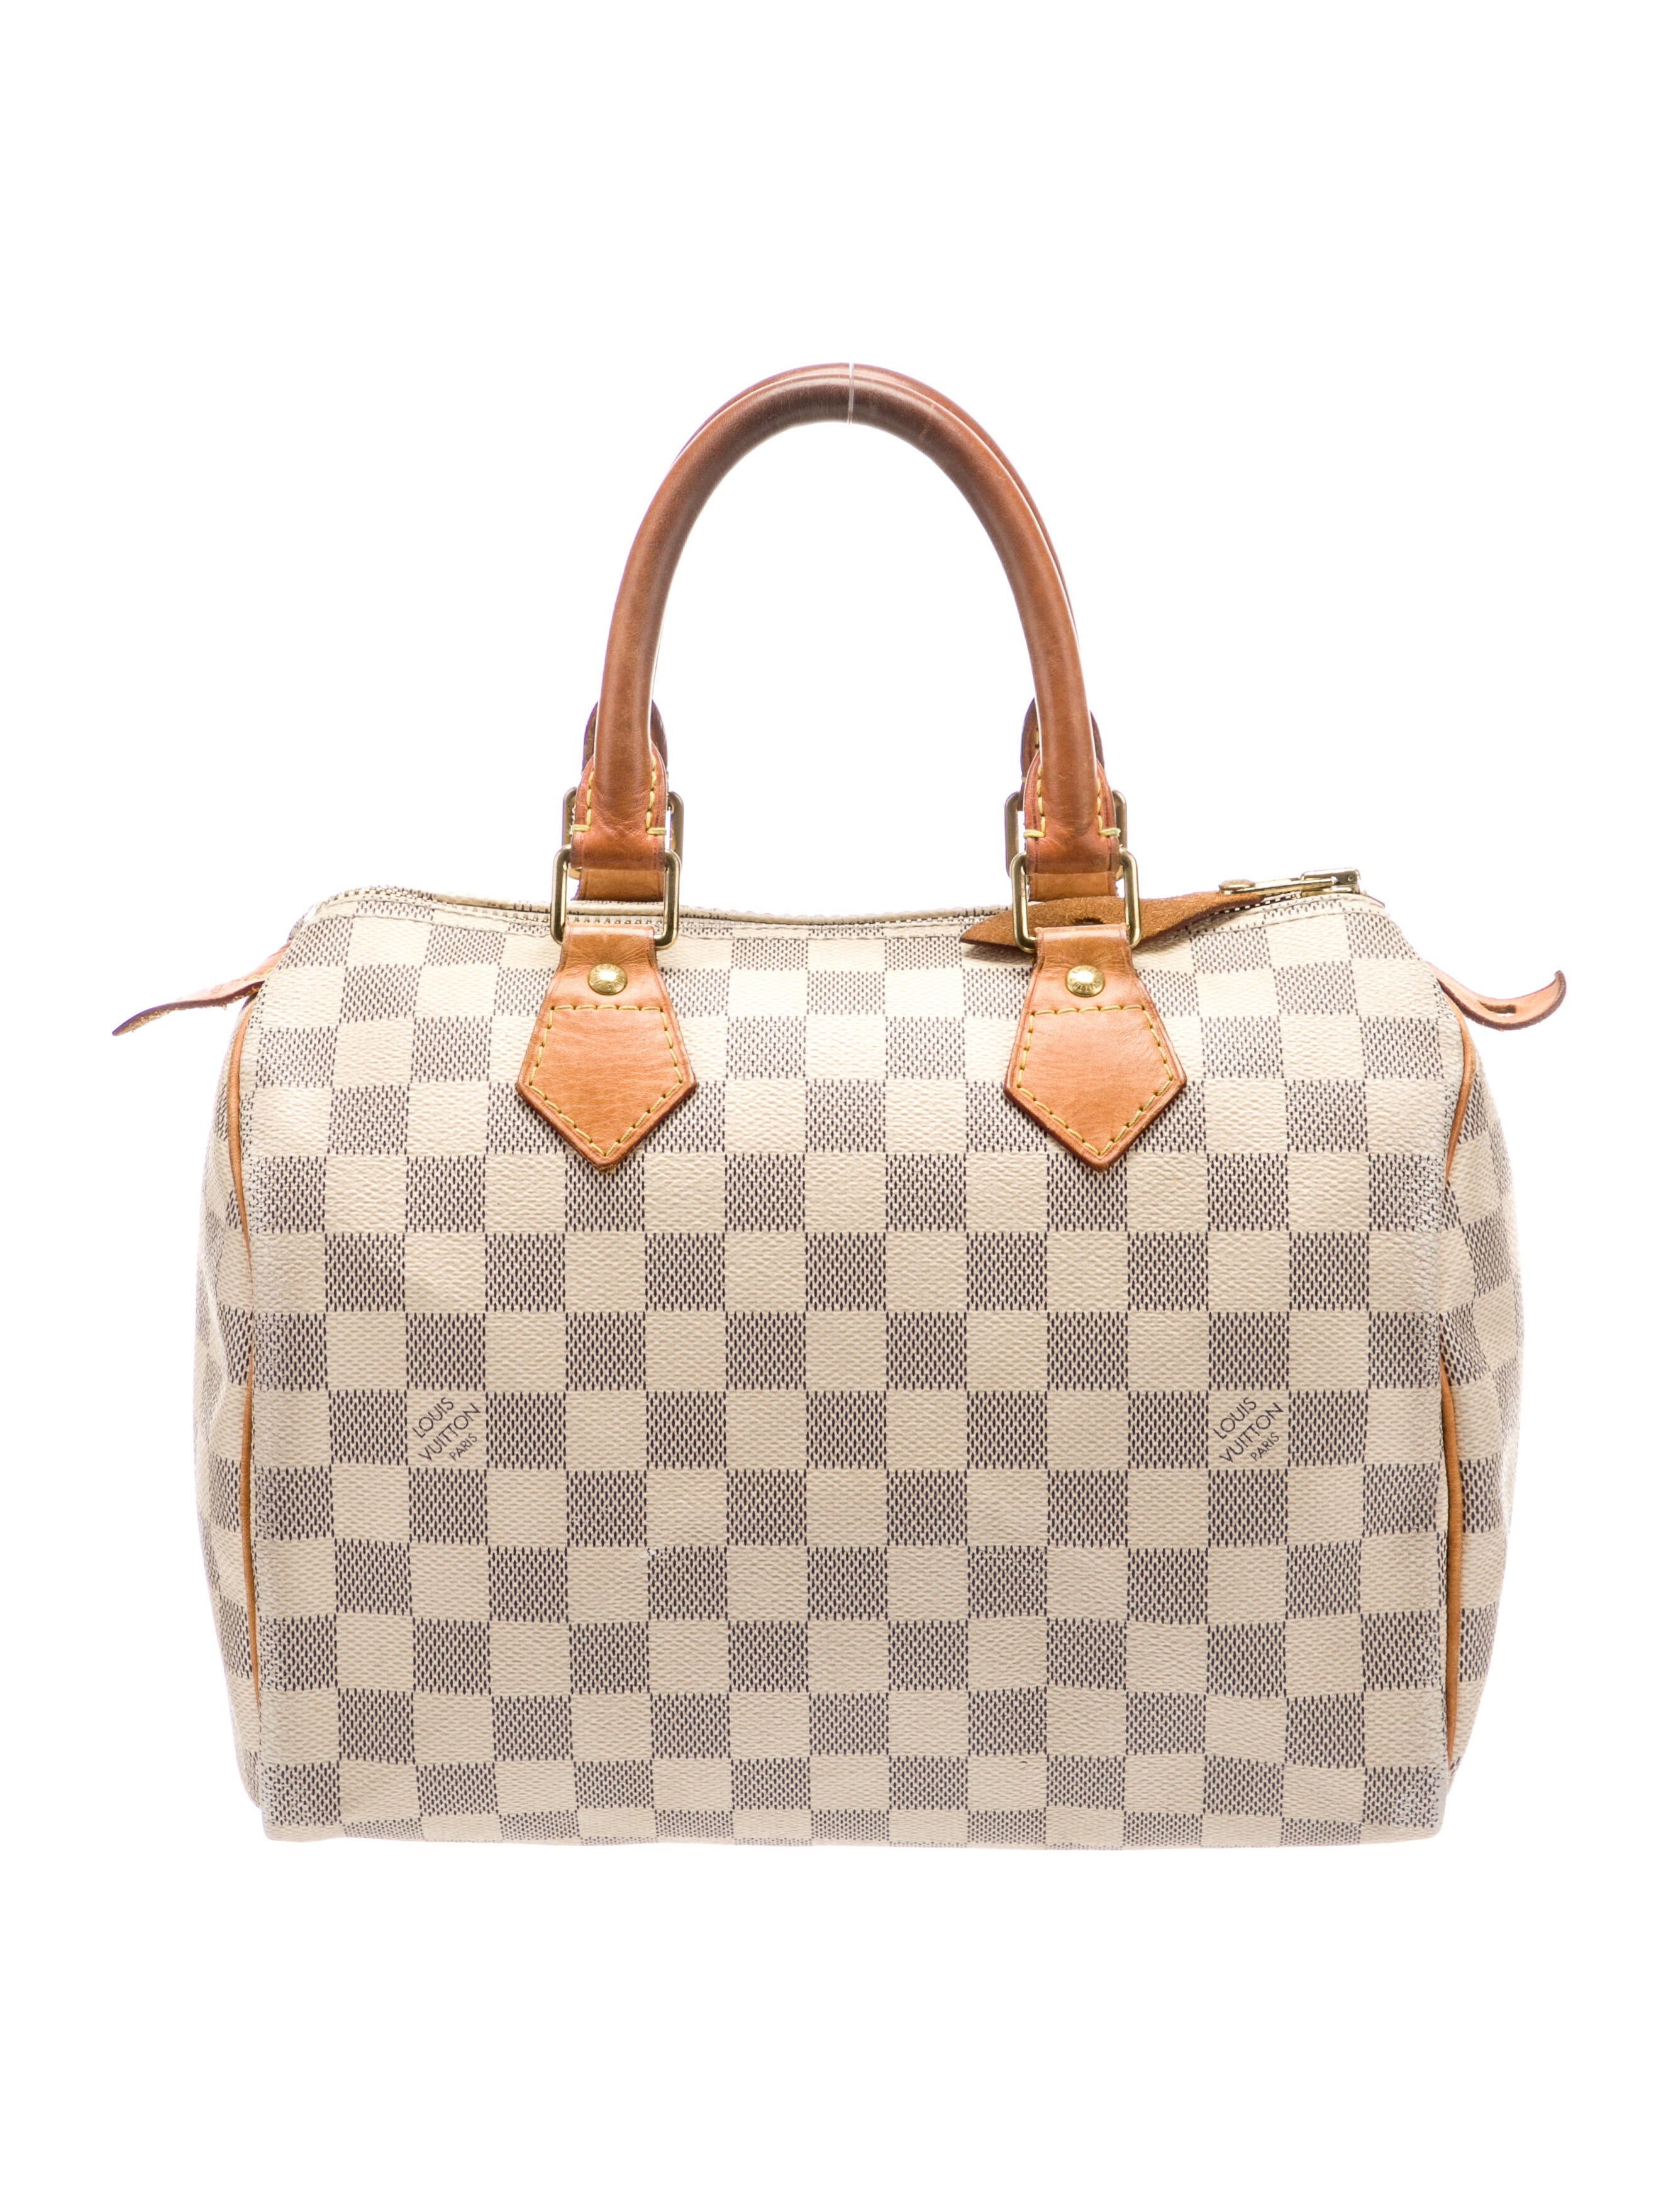 This 93-year-old Louis Vuitton bag is making a Speedy climb to It